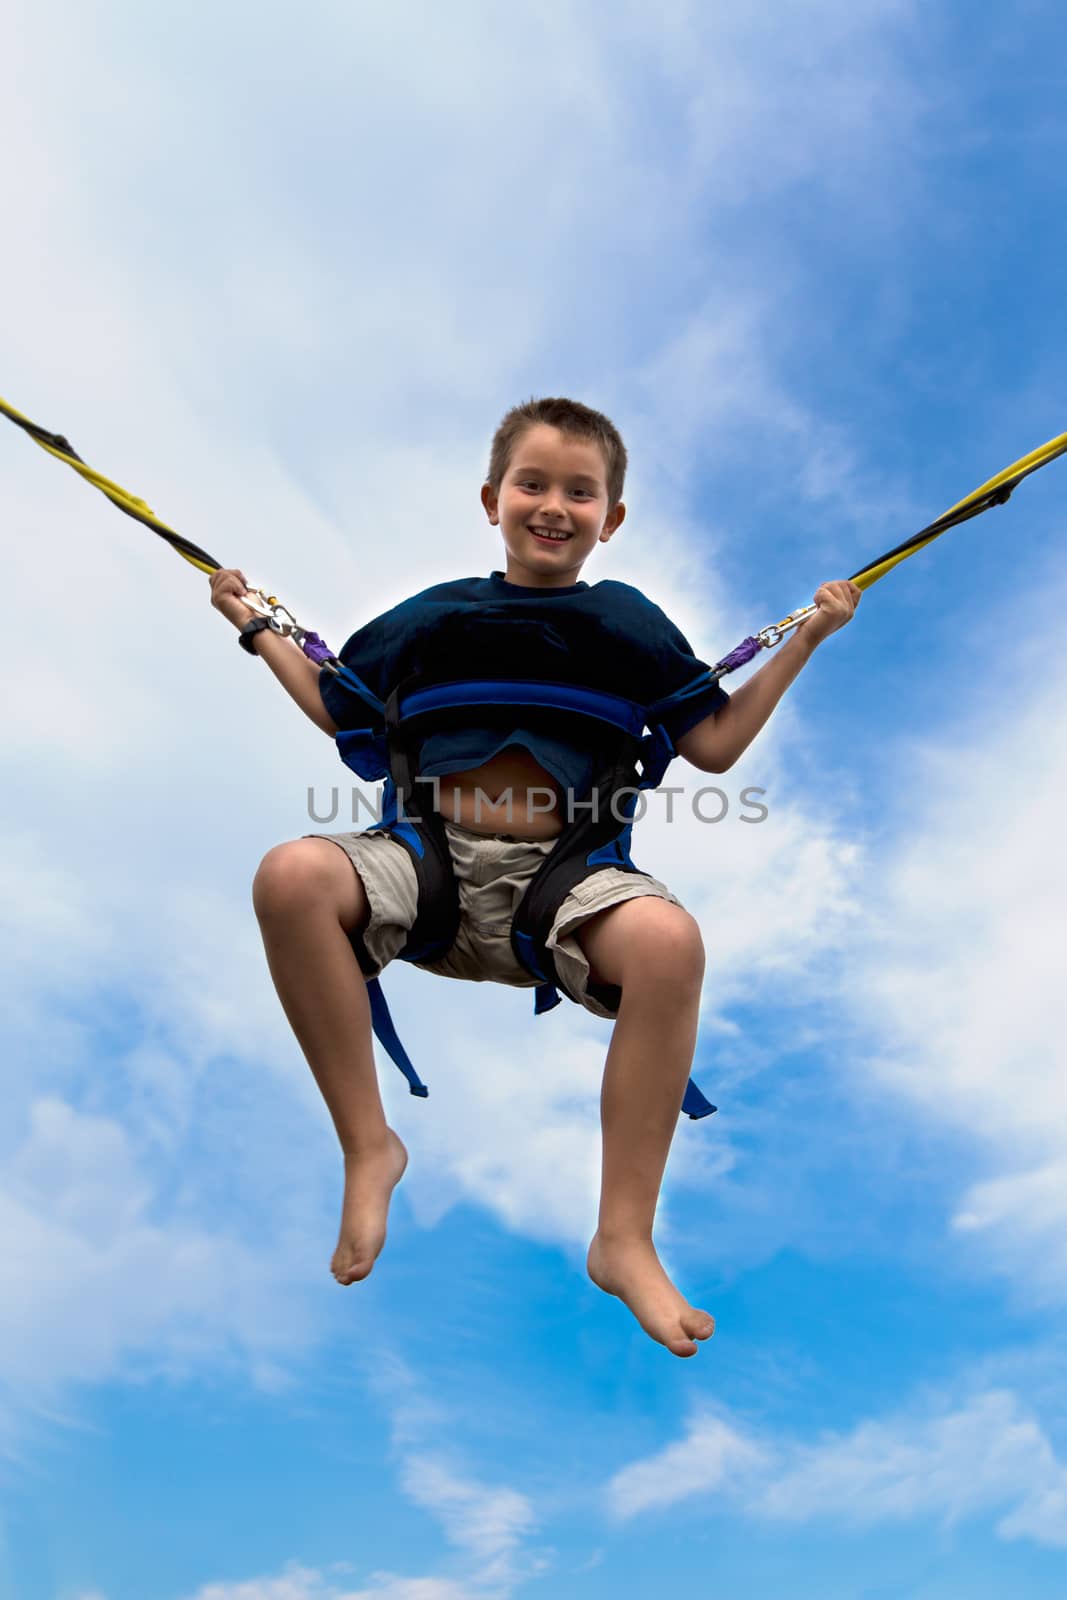 Young boy swinging high in the air against a cloudy blue summer sky in a harness attached to cables or ropes with a beaming smile of enjoyment